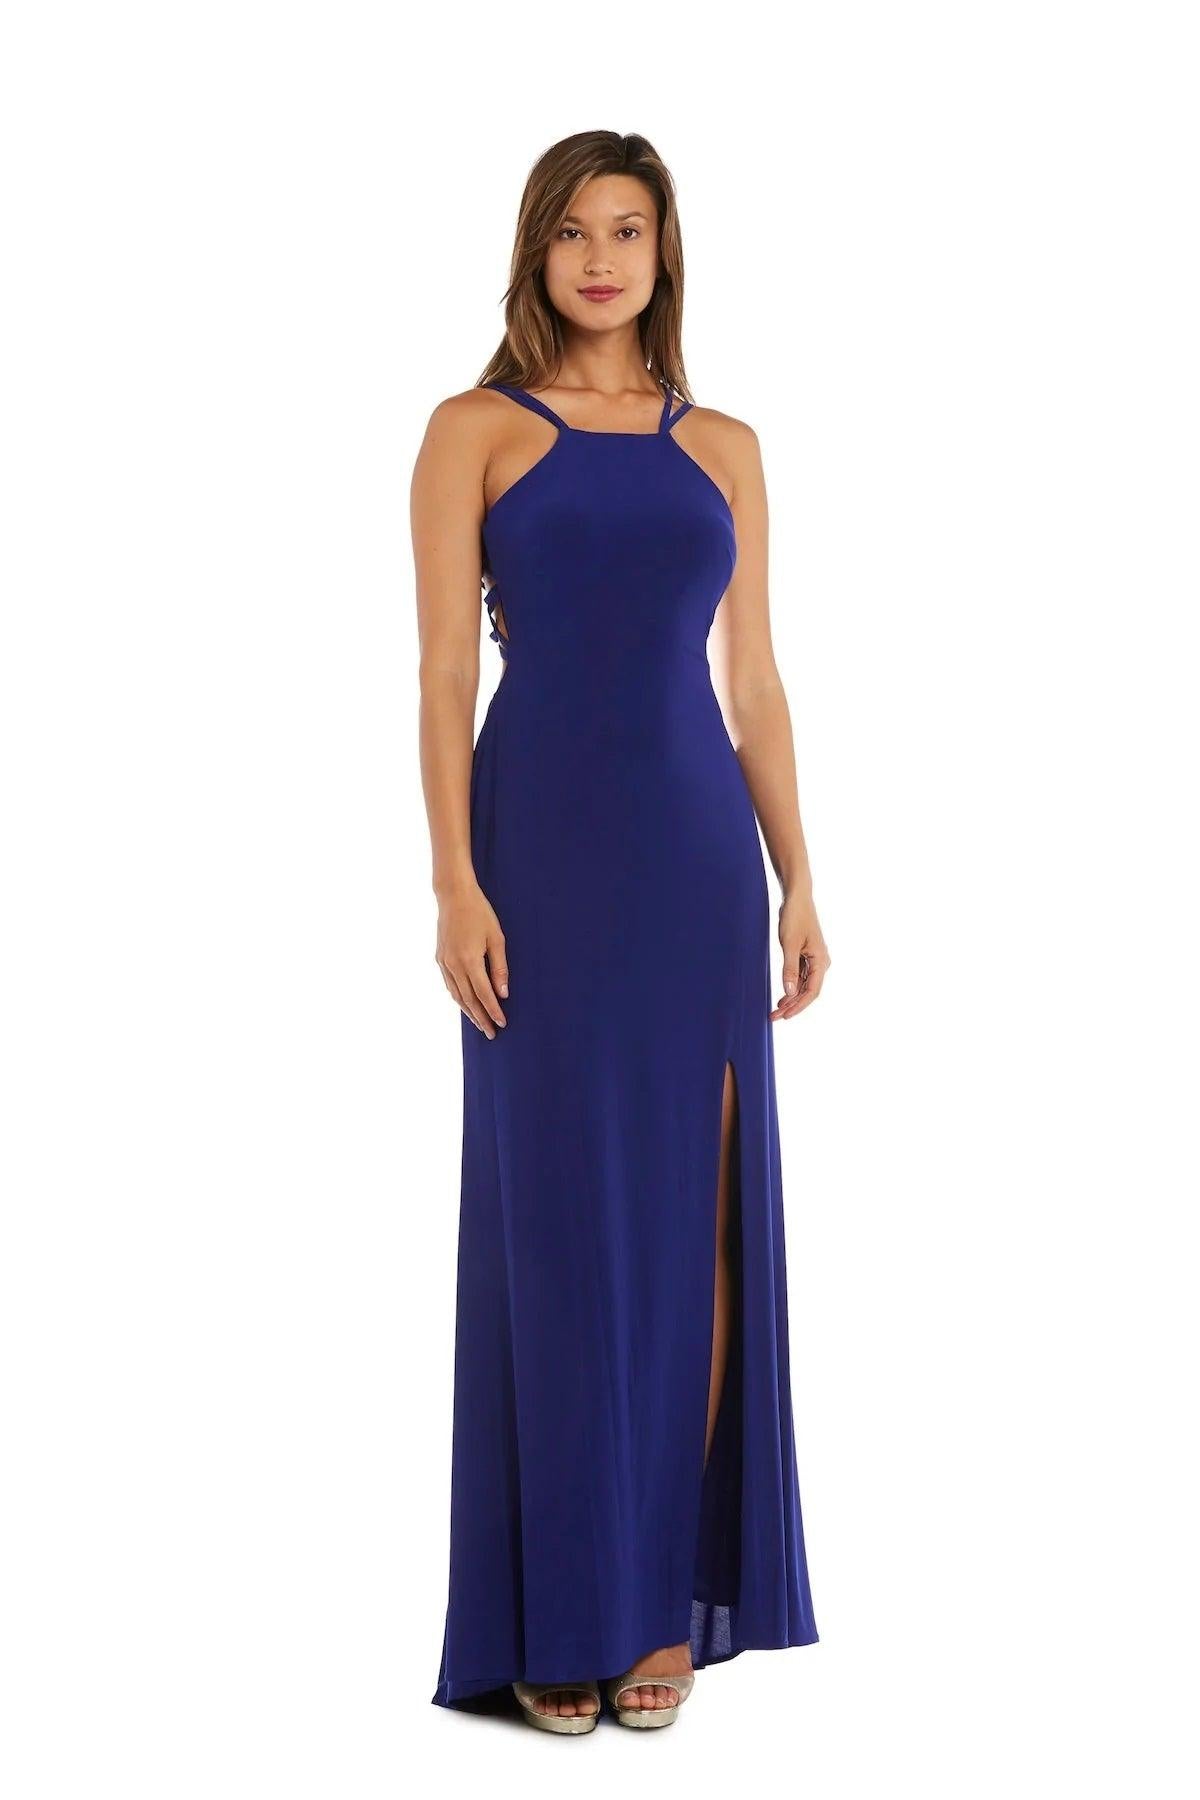 Morgan & Co Prom Fitted Long Formal Gown 12489A - The Dress Outlet